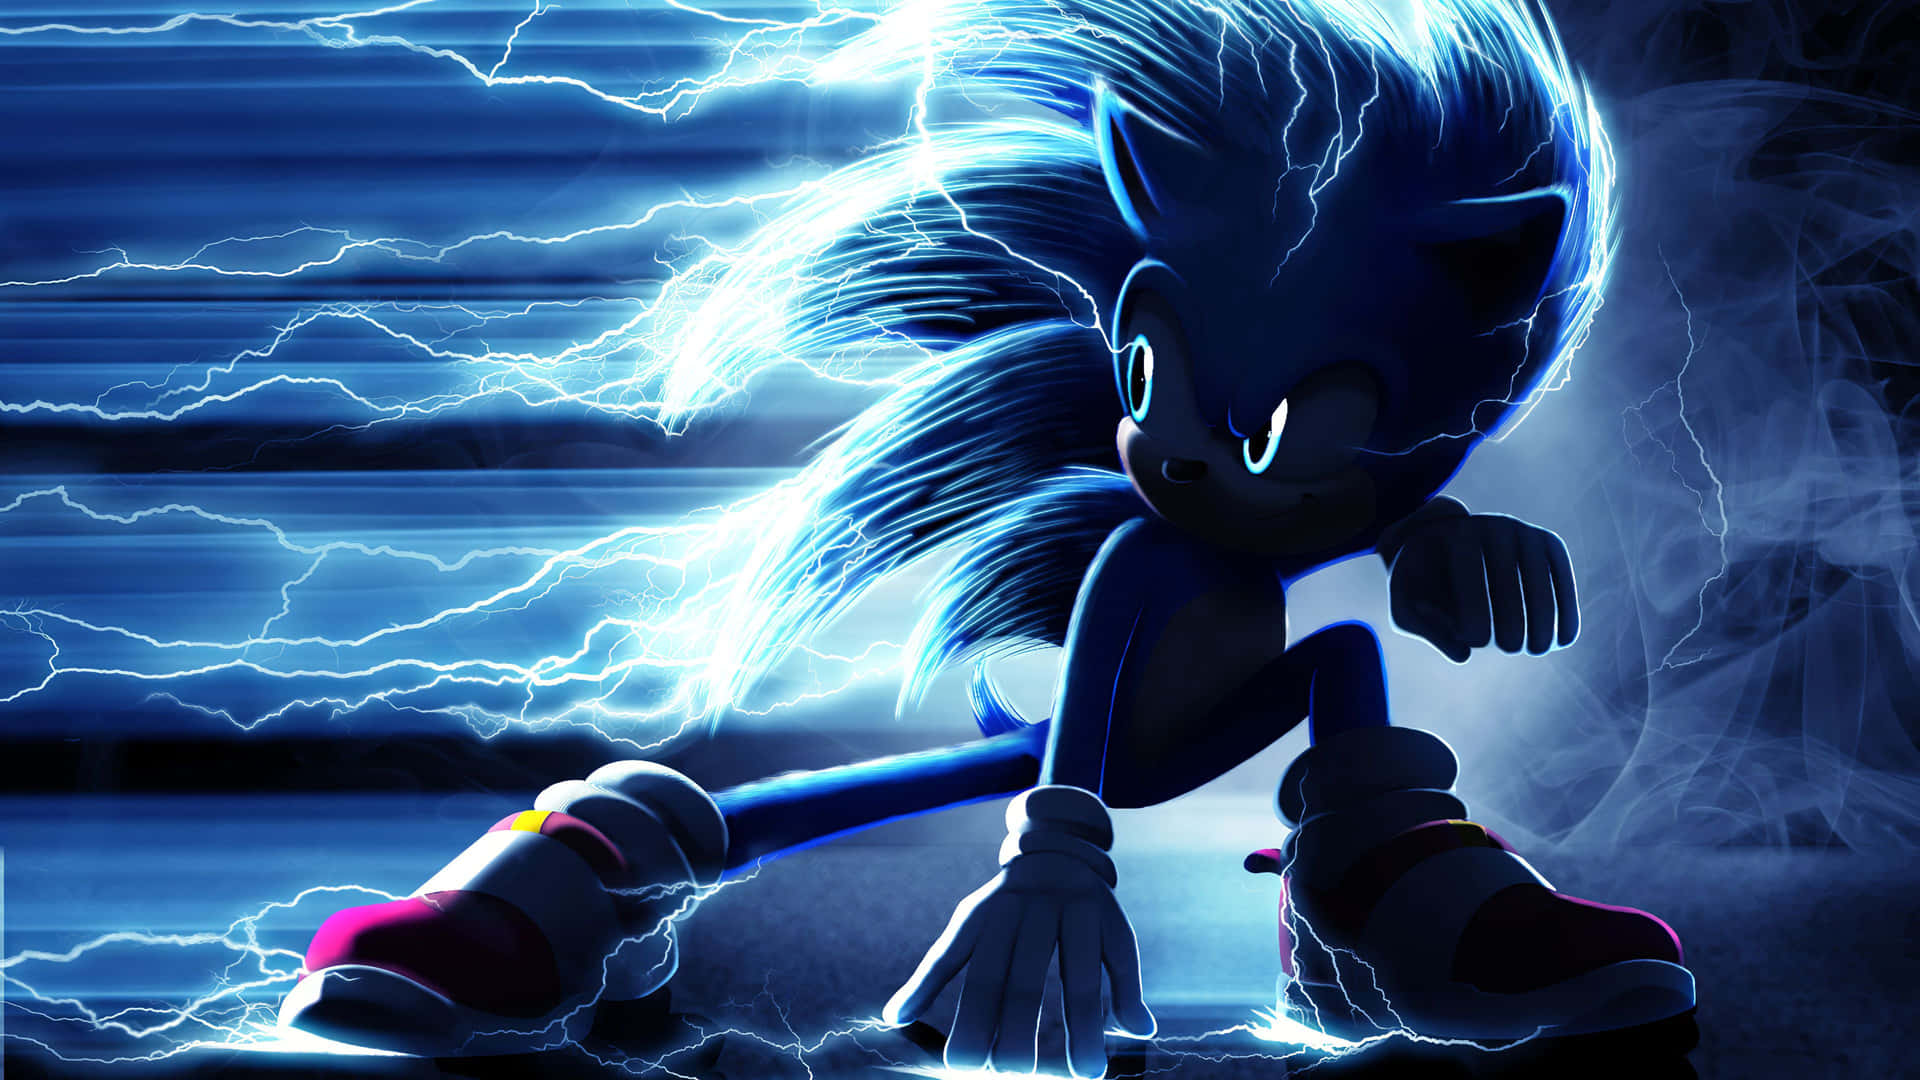 Take control of Sonic The Hedgehog and his super powers in 4K resolution Wallpaper